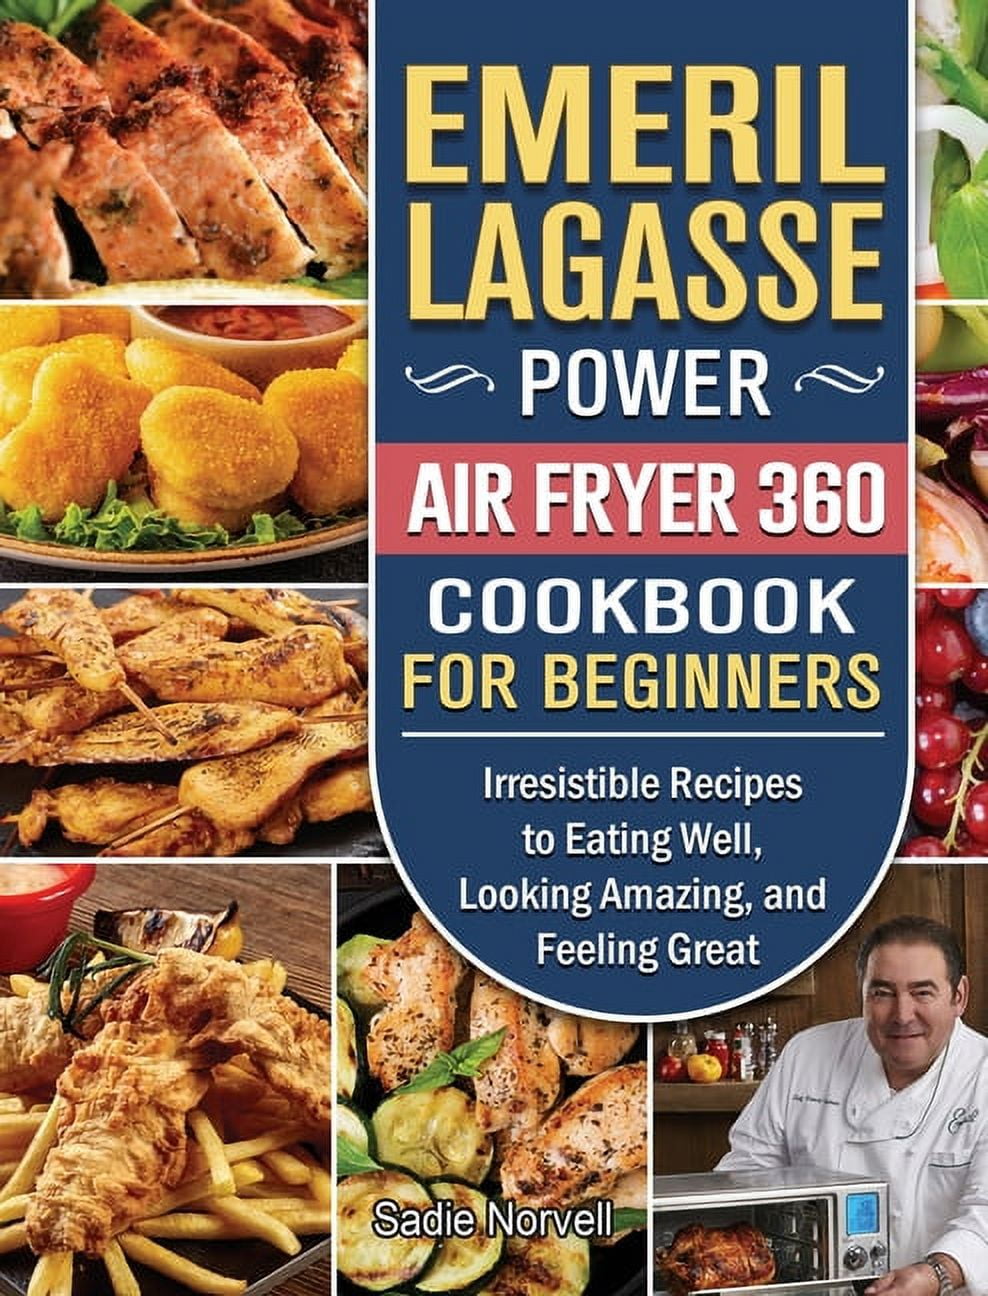  Emeril Lagasse French Door 360 Dual Zone Air Fryer Cookbook  (FULL COLOR PHOTOS): 1800 Days of Tasty, Healthy Recipes and 30-Day Meal  Plan for Beginners and Advanced Kitchen Lovers